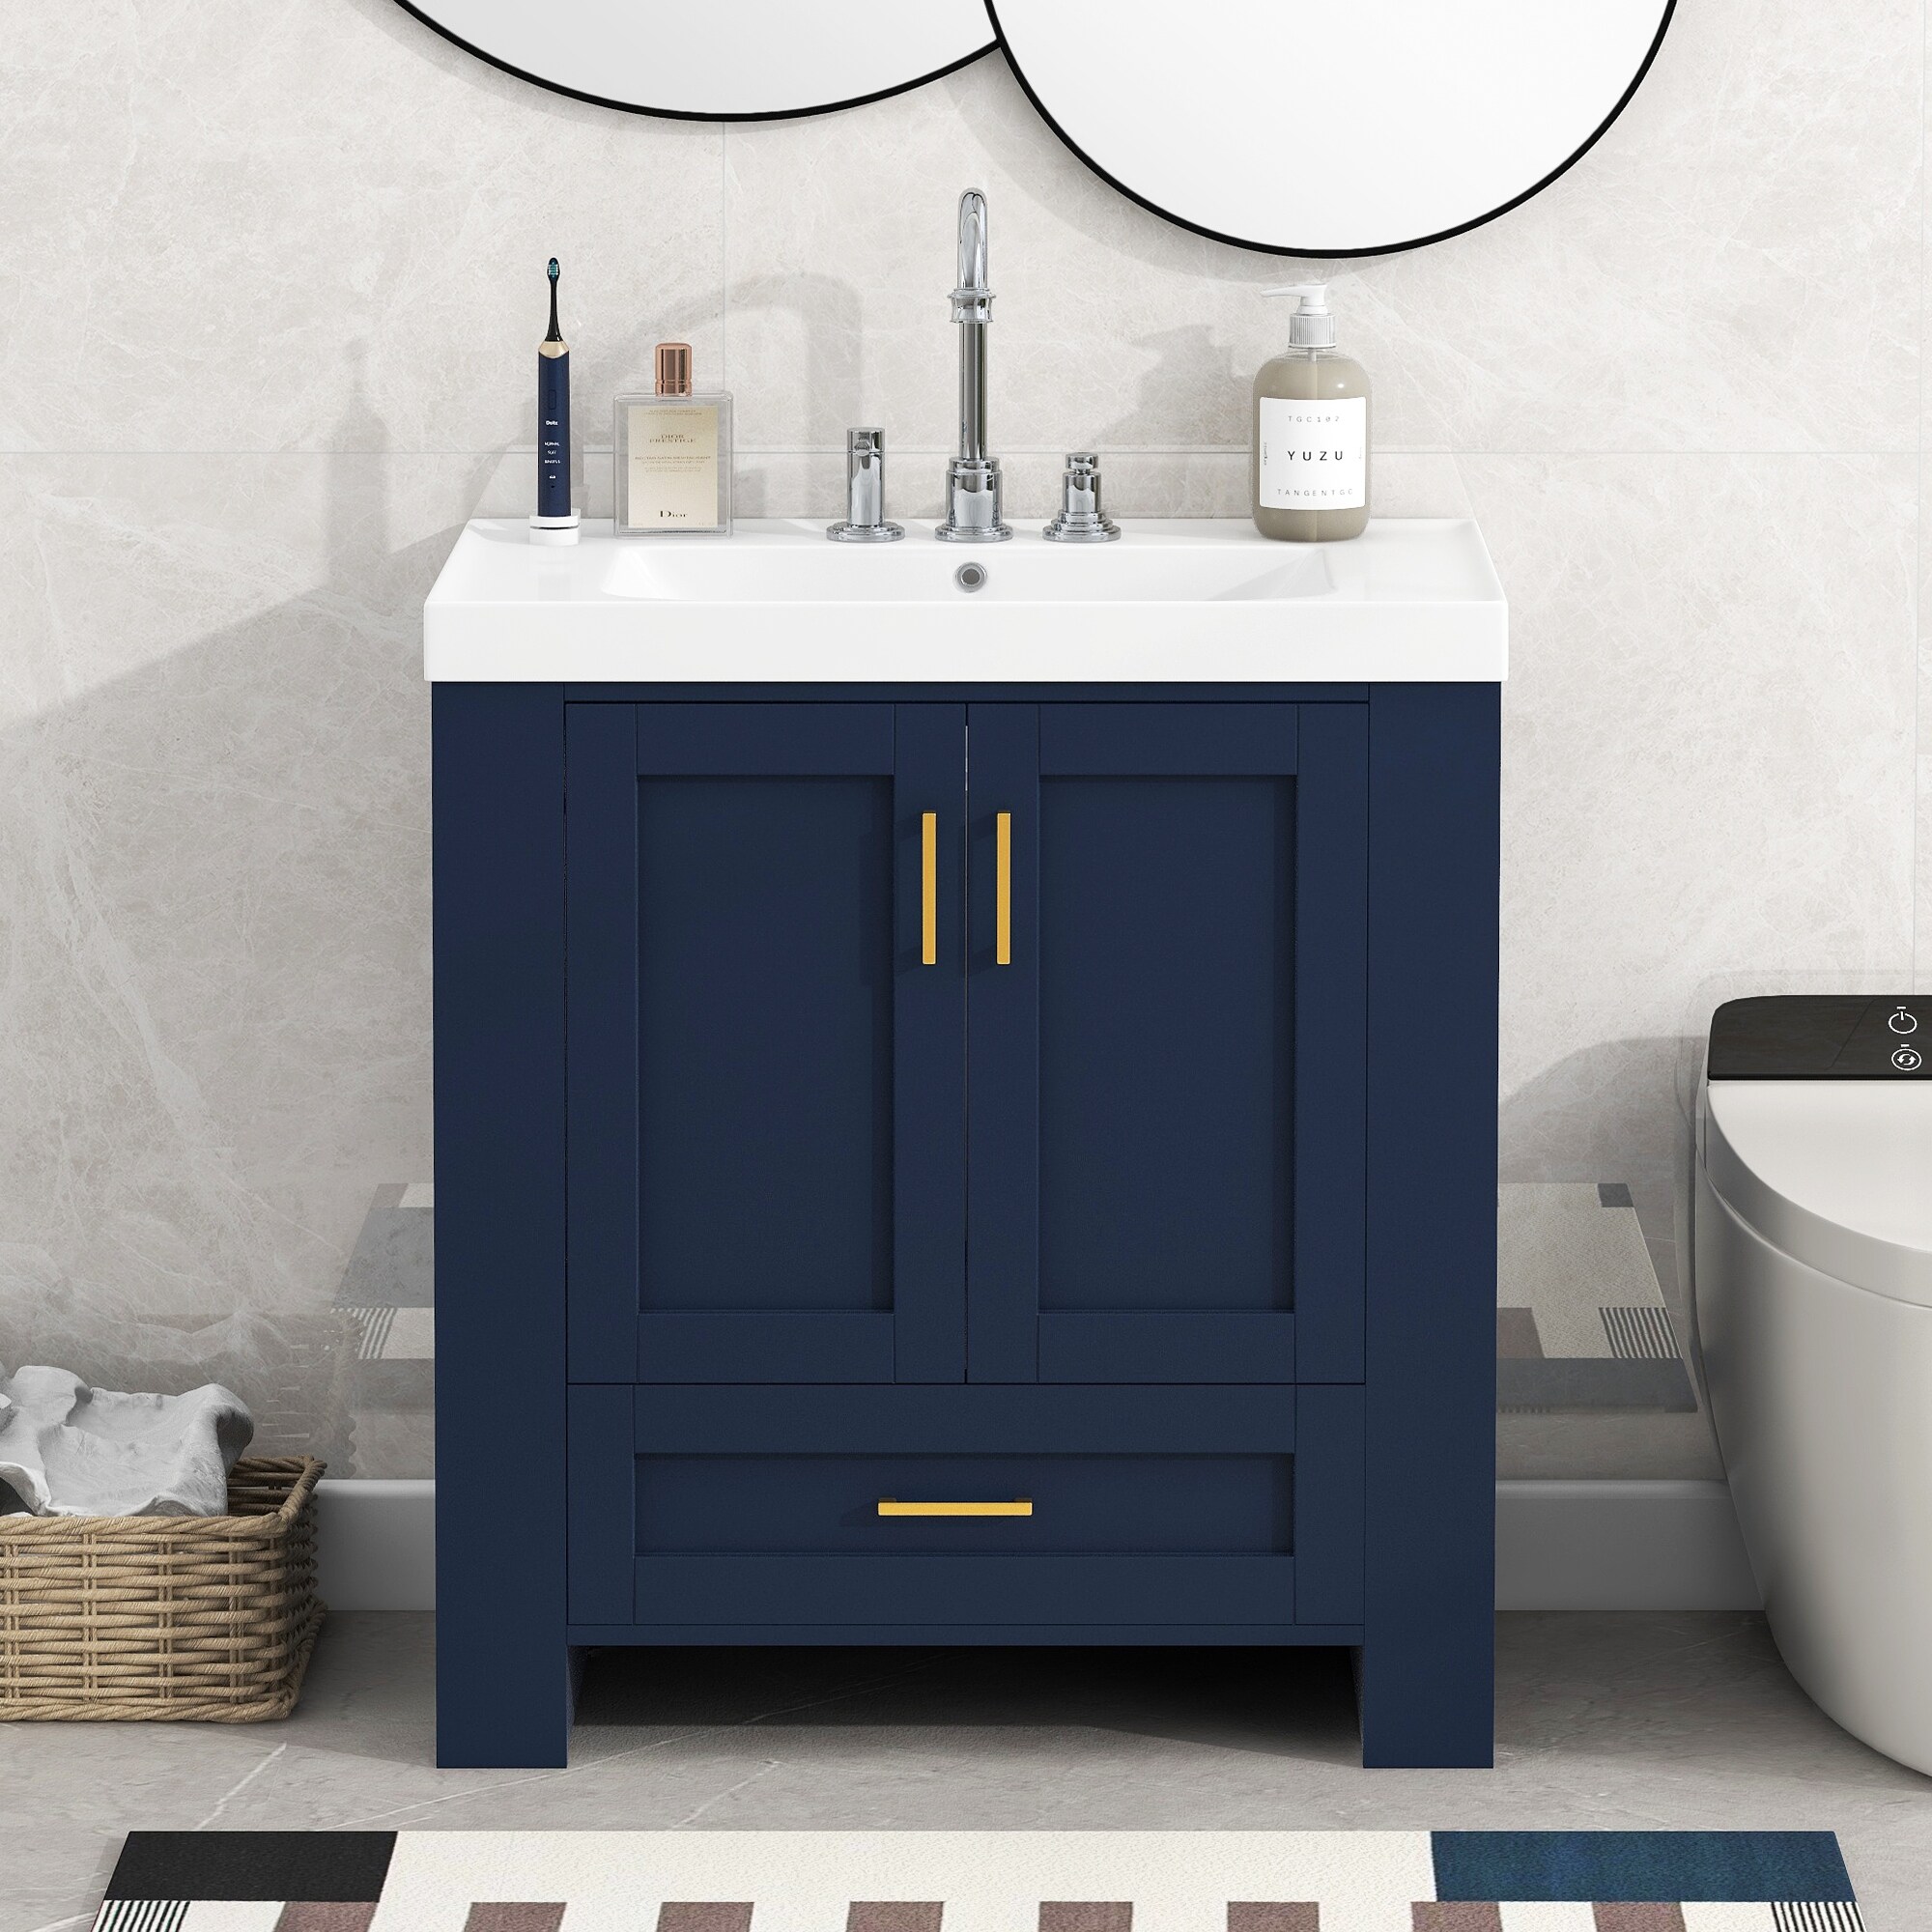 https://ak1.ostkcdn.com/images/products/is/images/direct/e01aa037d25450a3c2de528f222ab4146c8140bb/30%27%27-Bathroom-Vanity-with-Sink%2C-Modern-Bathroom-Cabinet-with-Towel-Rack%2C-Freestanding-Bathroom-Vanity-with-Drawer-and-Shelves.jpg